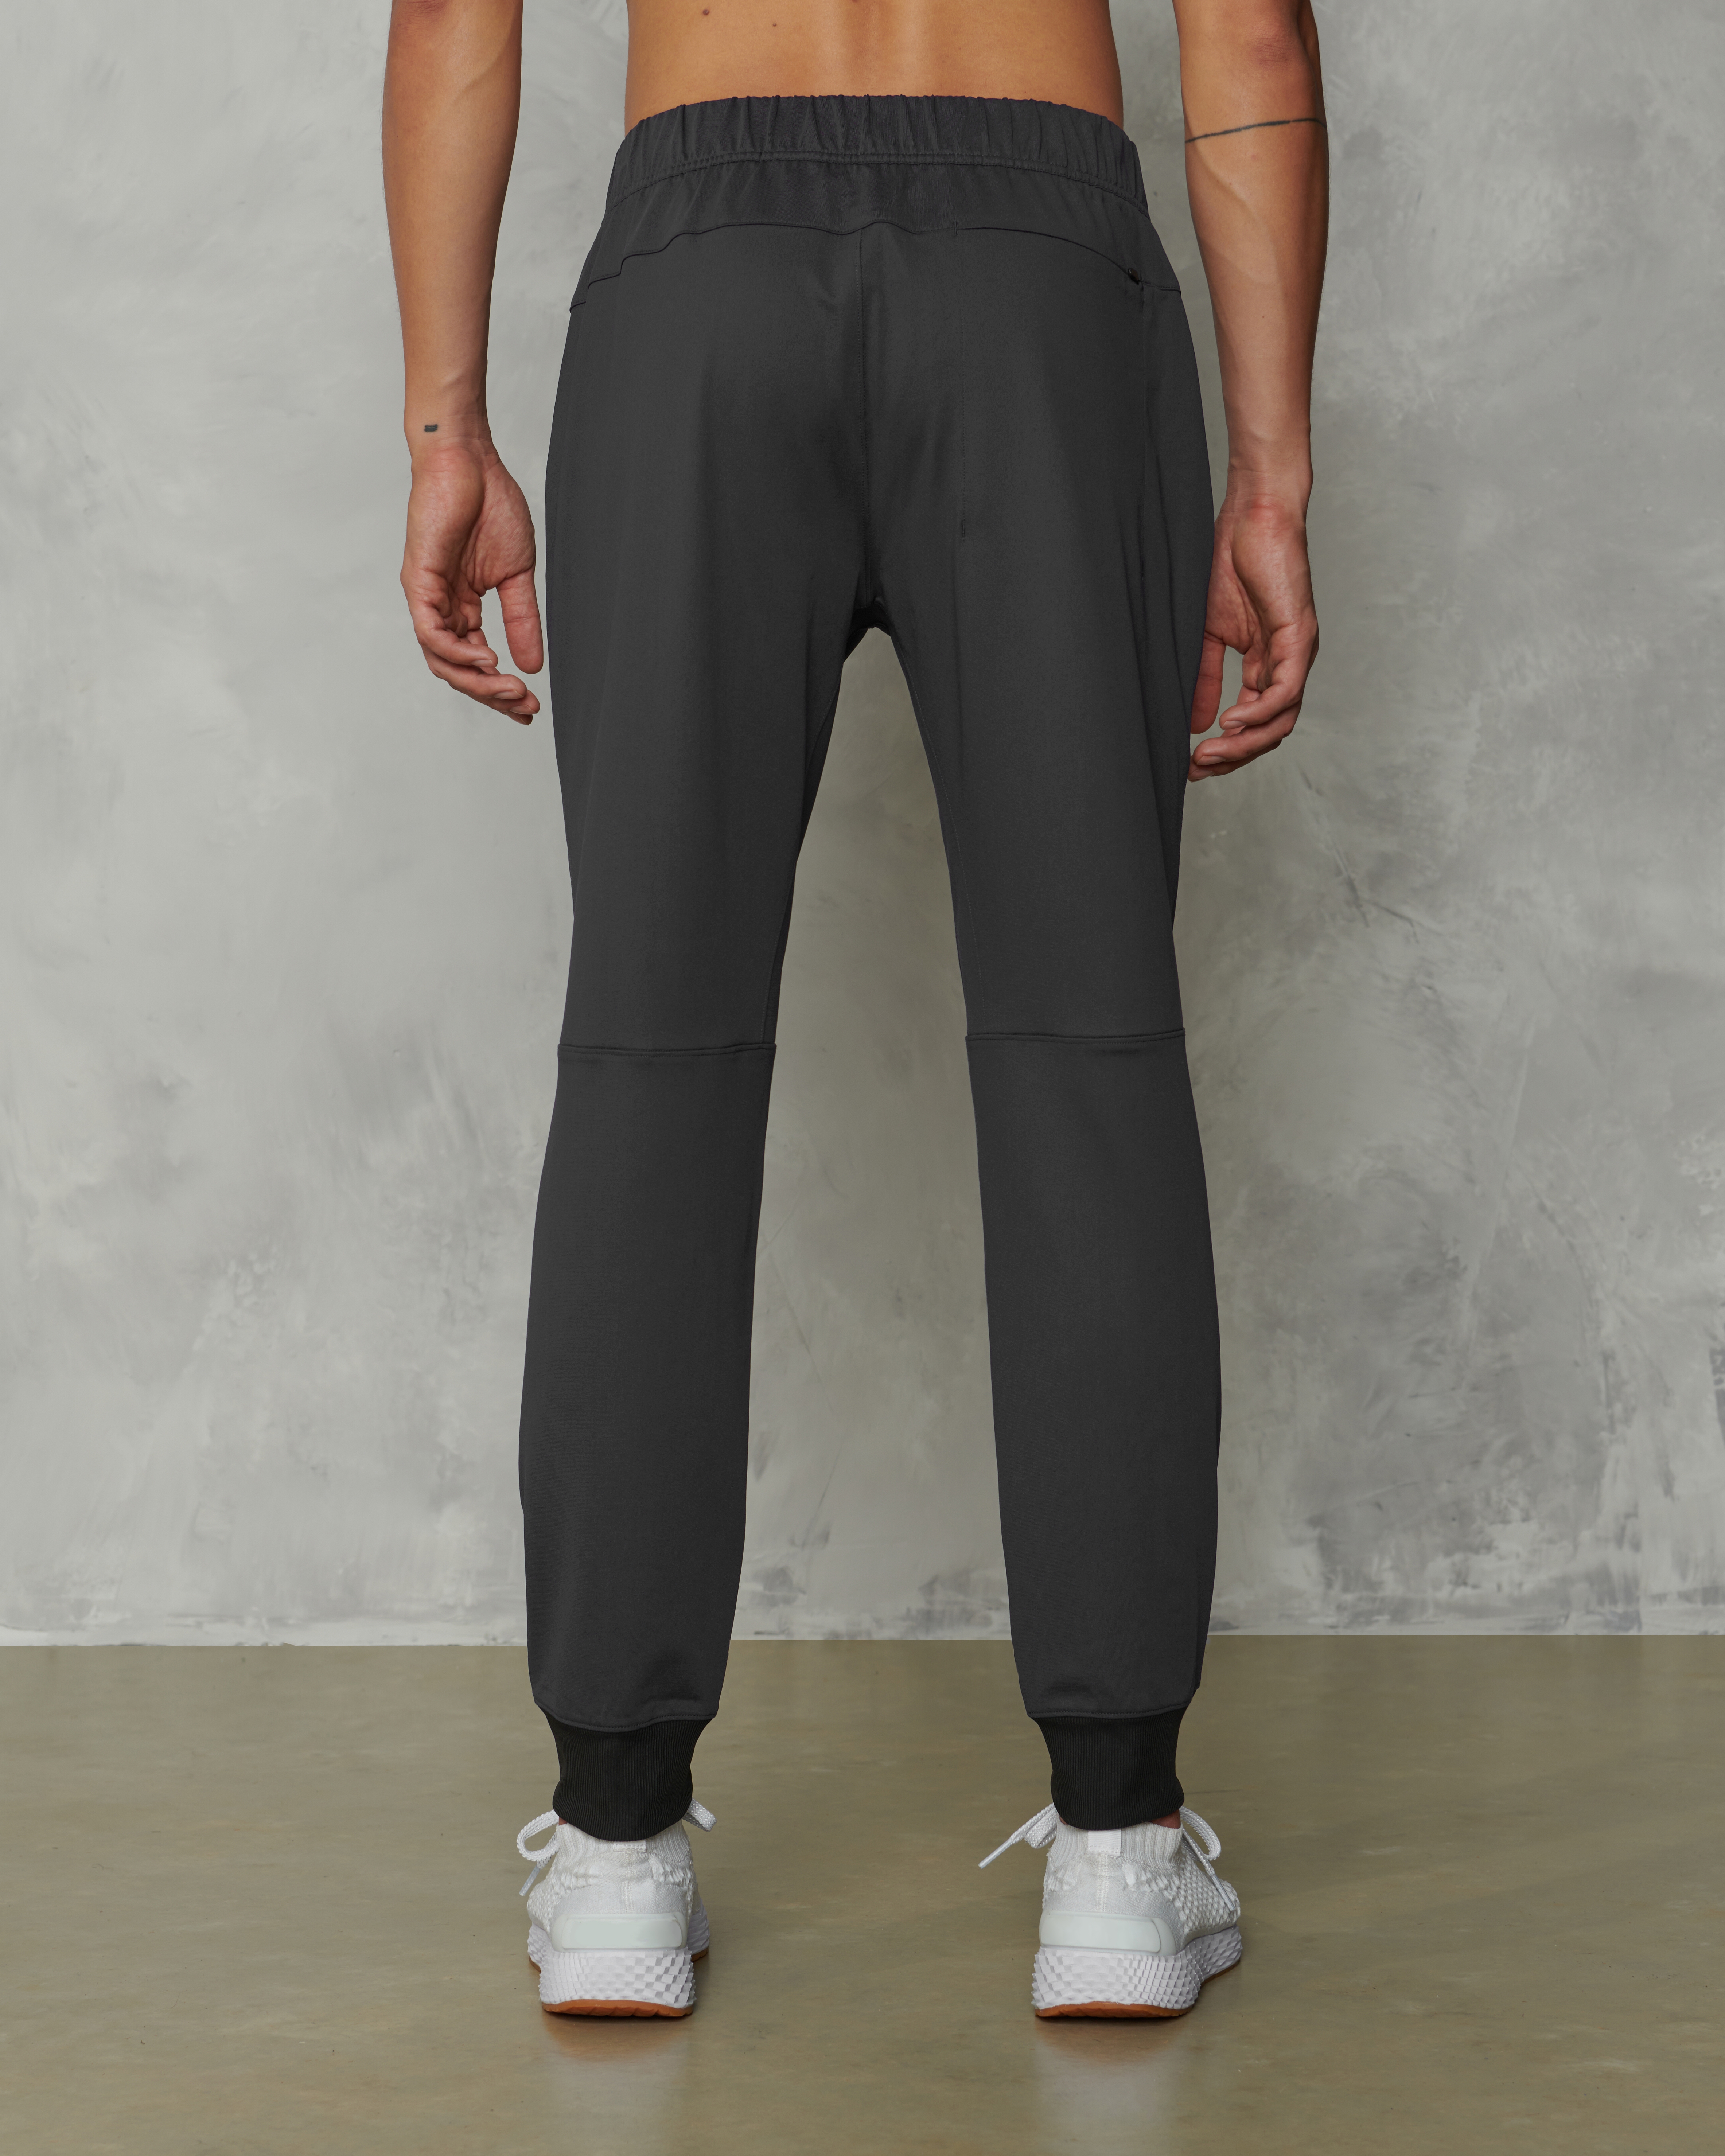 Men's YPB Gym to Grocery Jogger | Men's Bottoms | Abercrombie.com